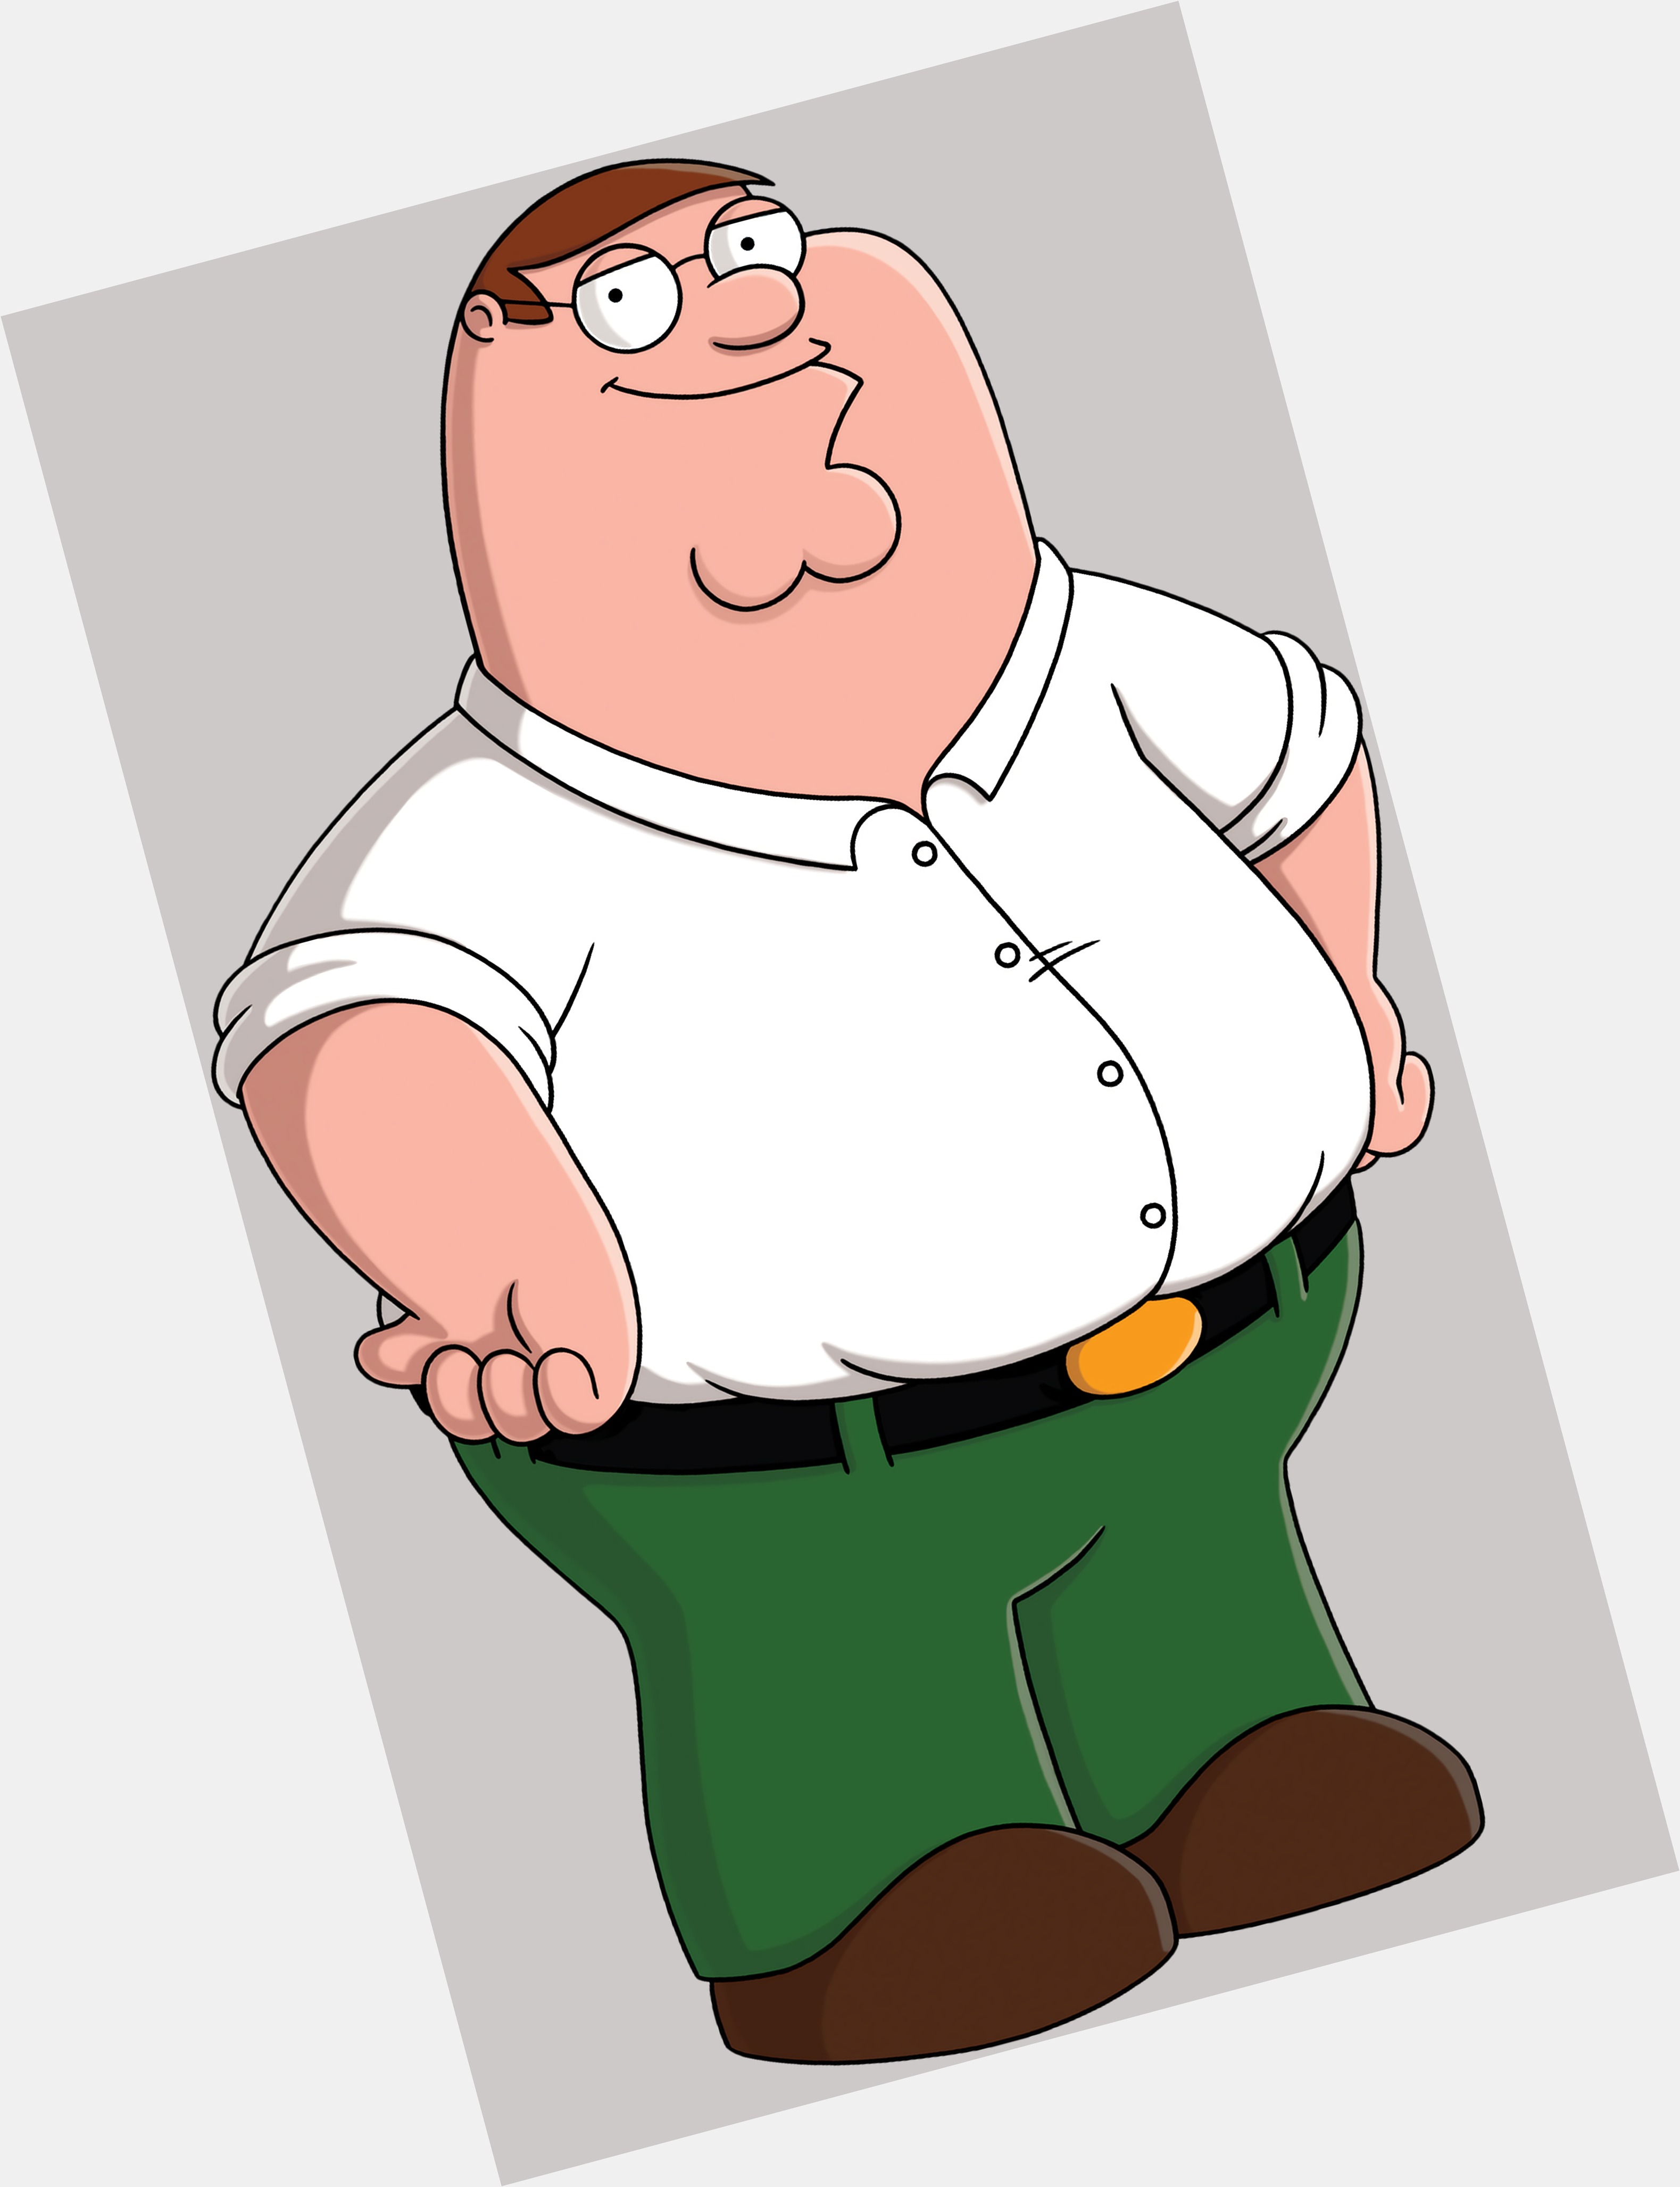 peter griffin quotes 0.jpg